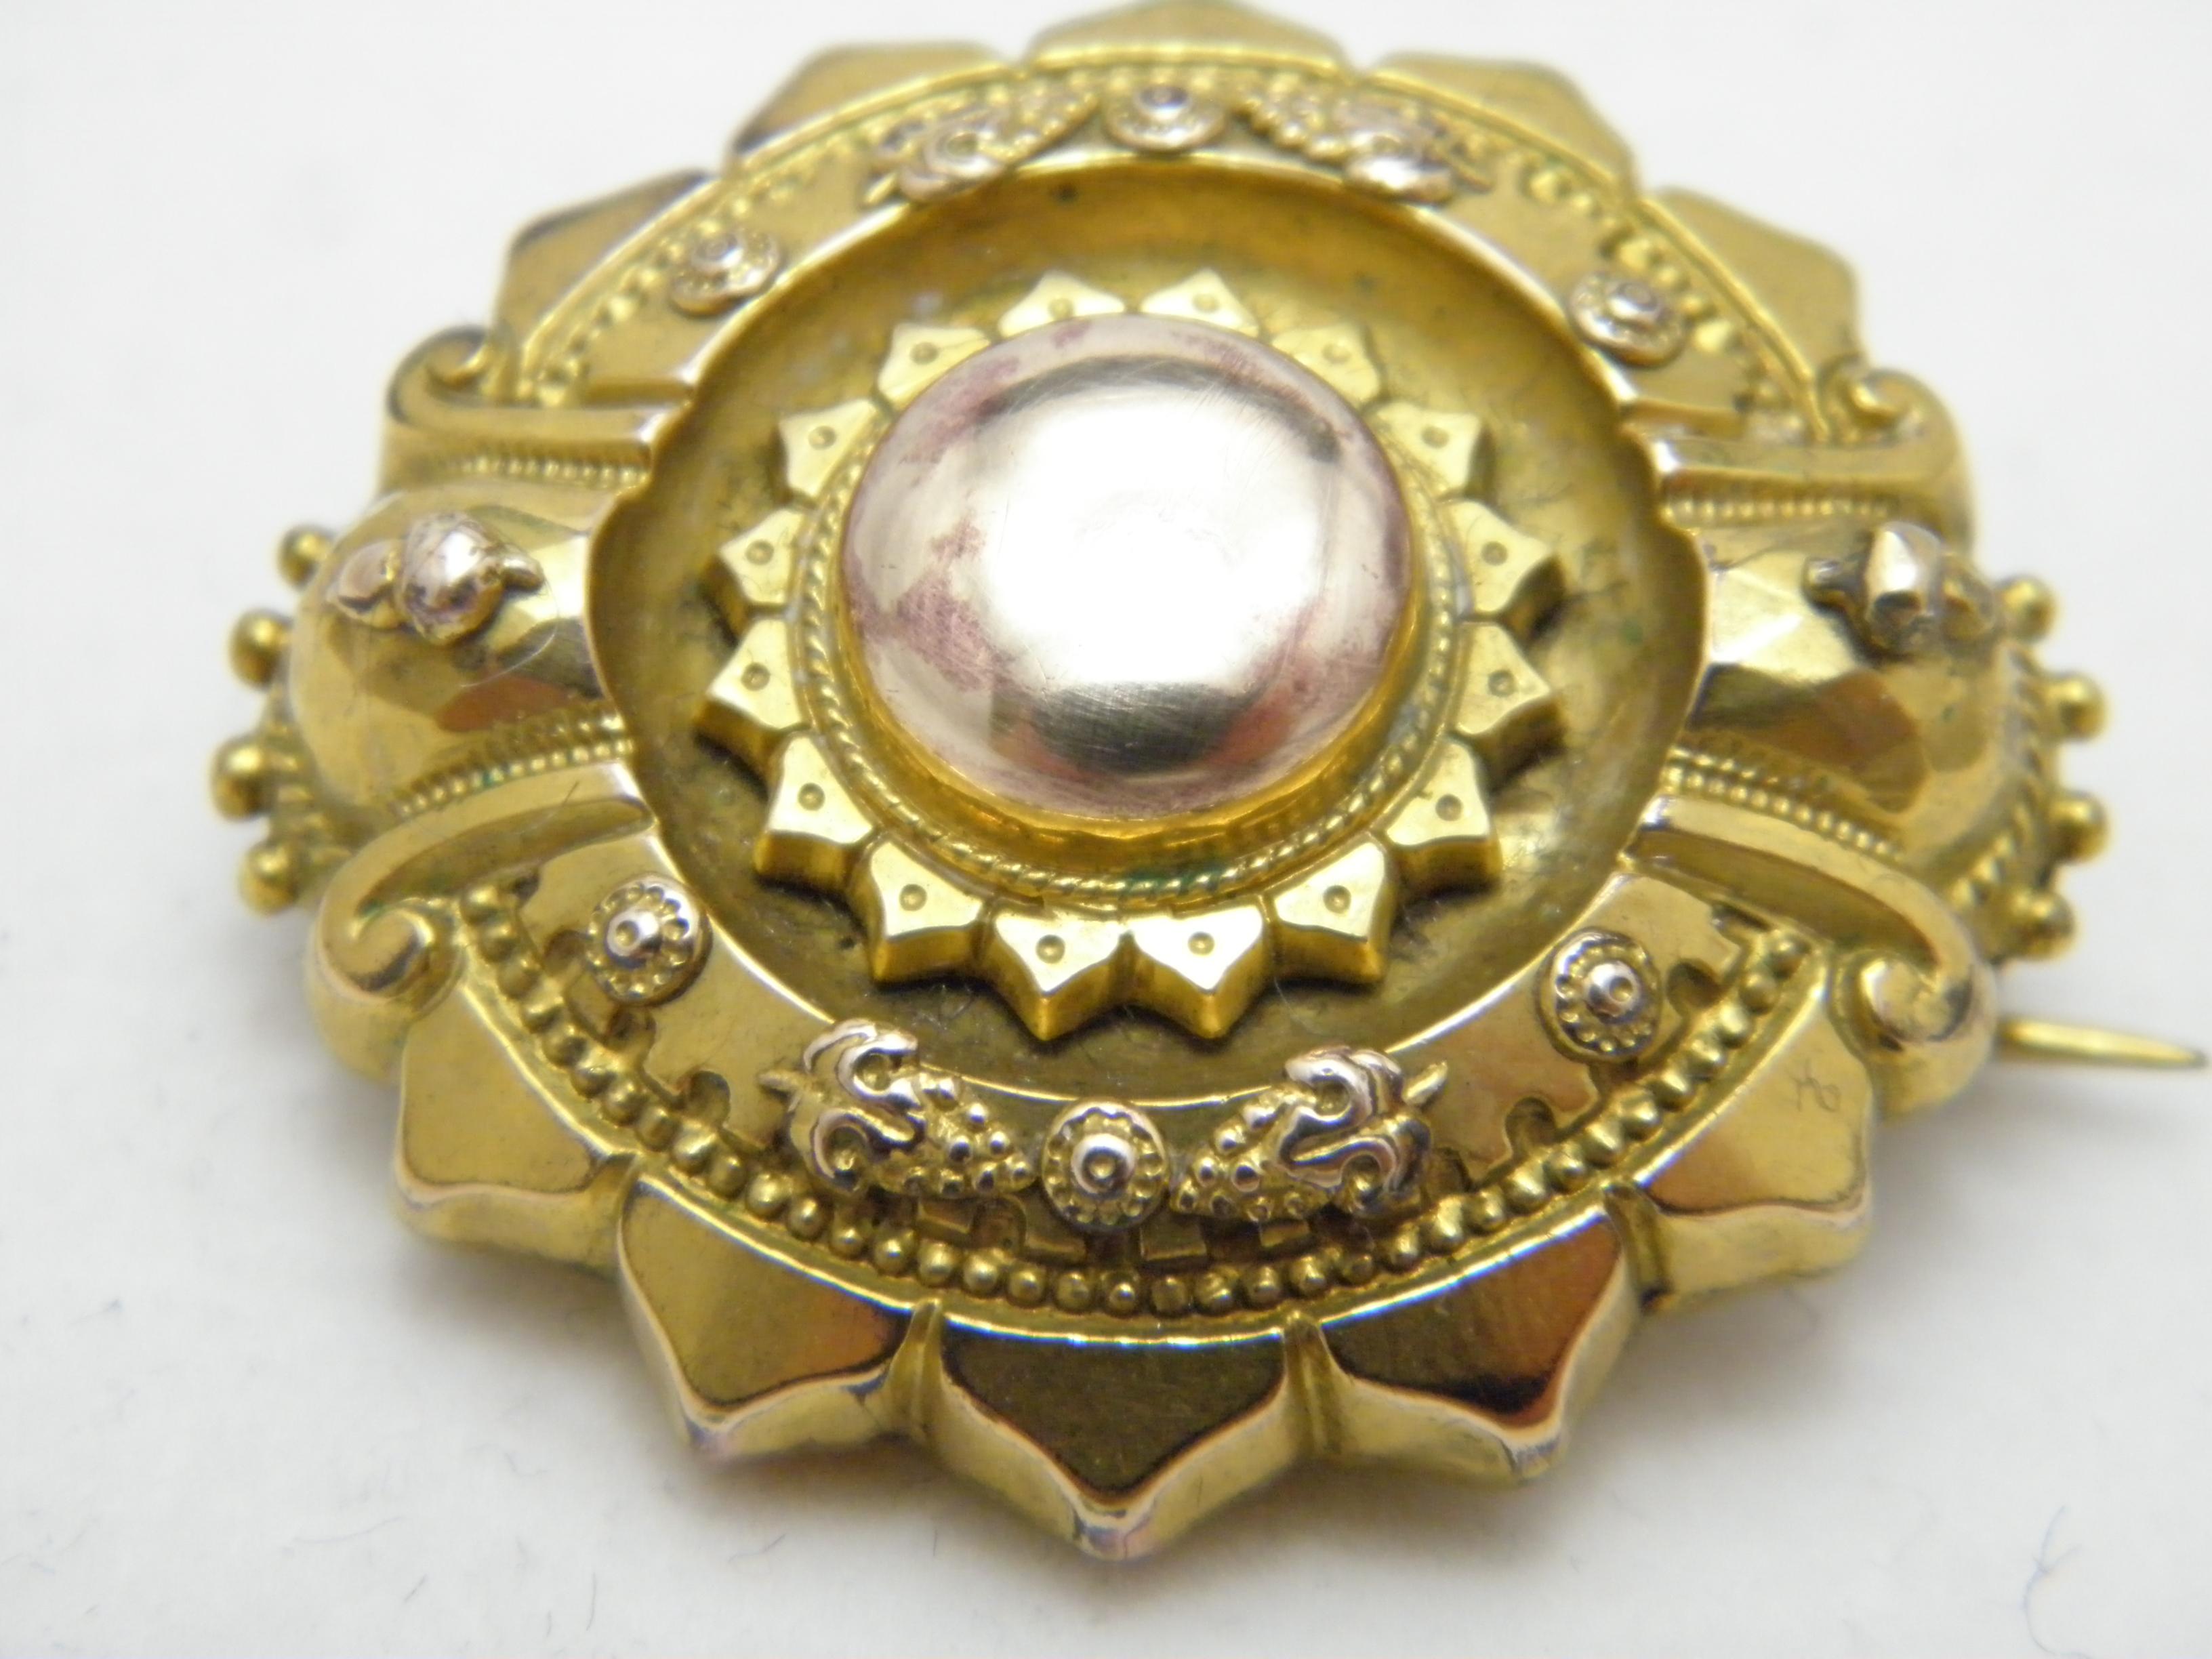 George III Antique 15ct Gold Locket Photo Target Brooch Pin c1810 Heavy 10g 625 Purity For Sale